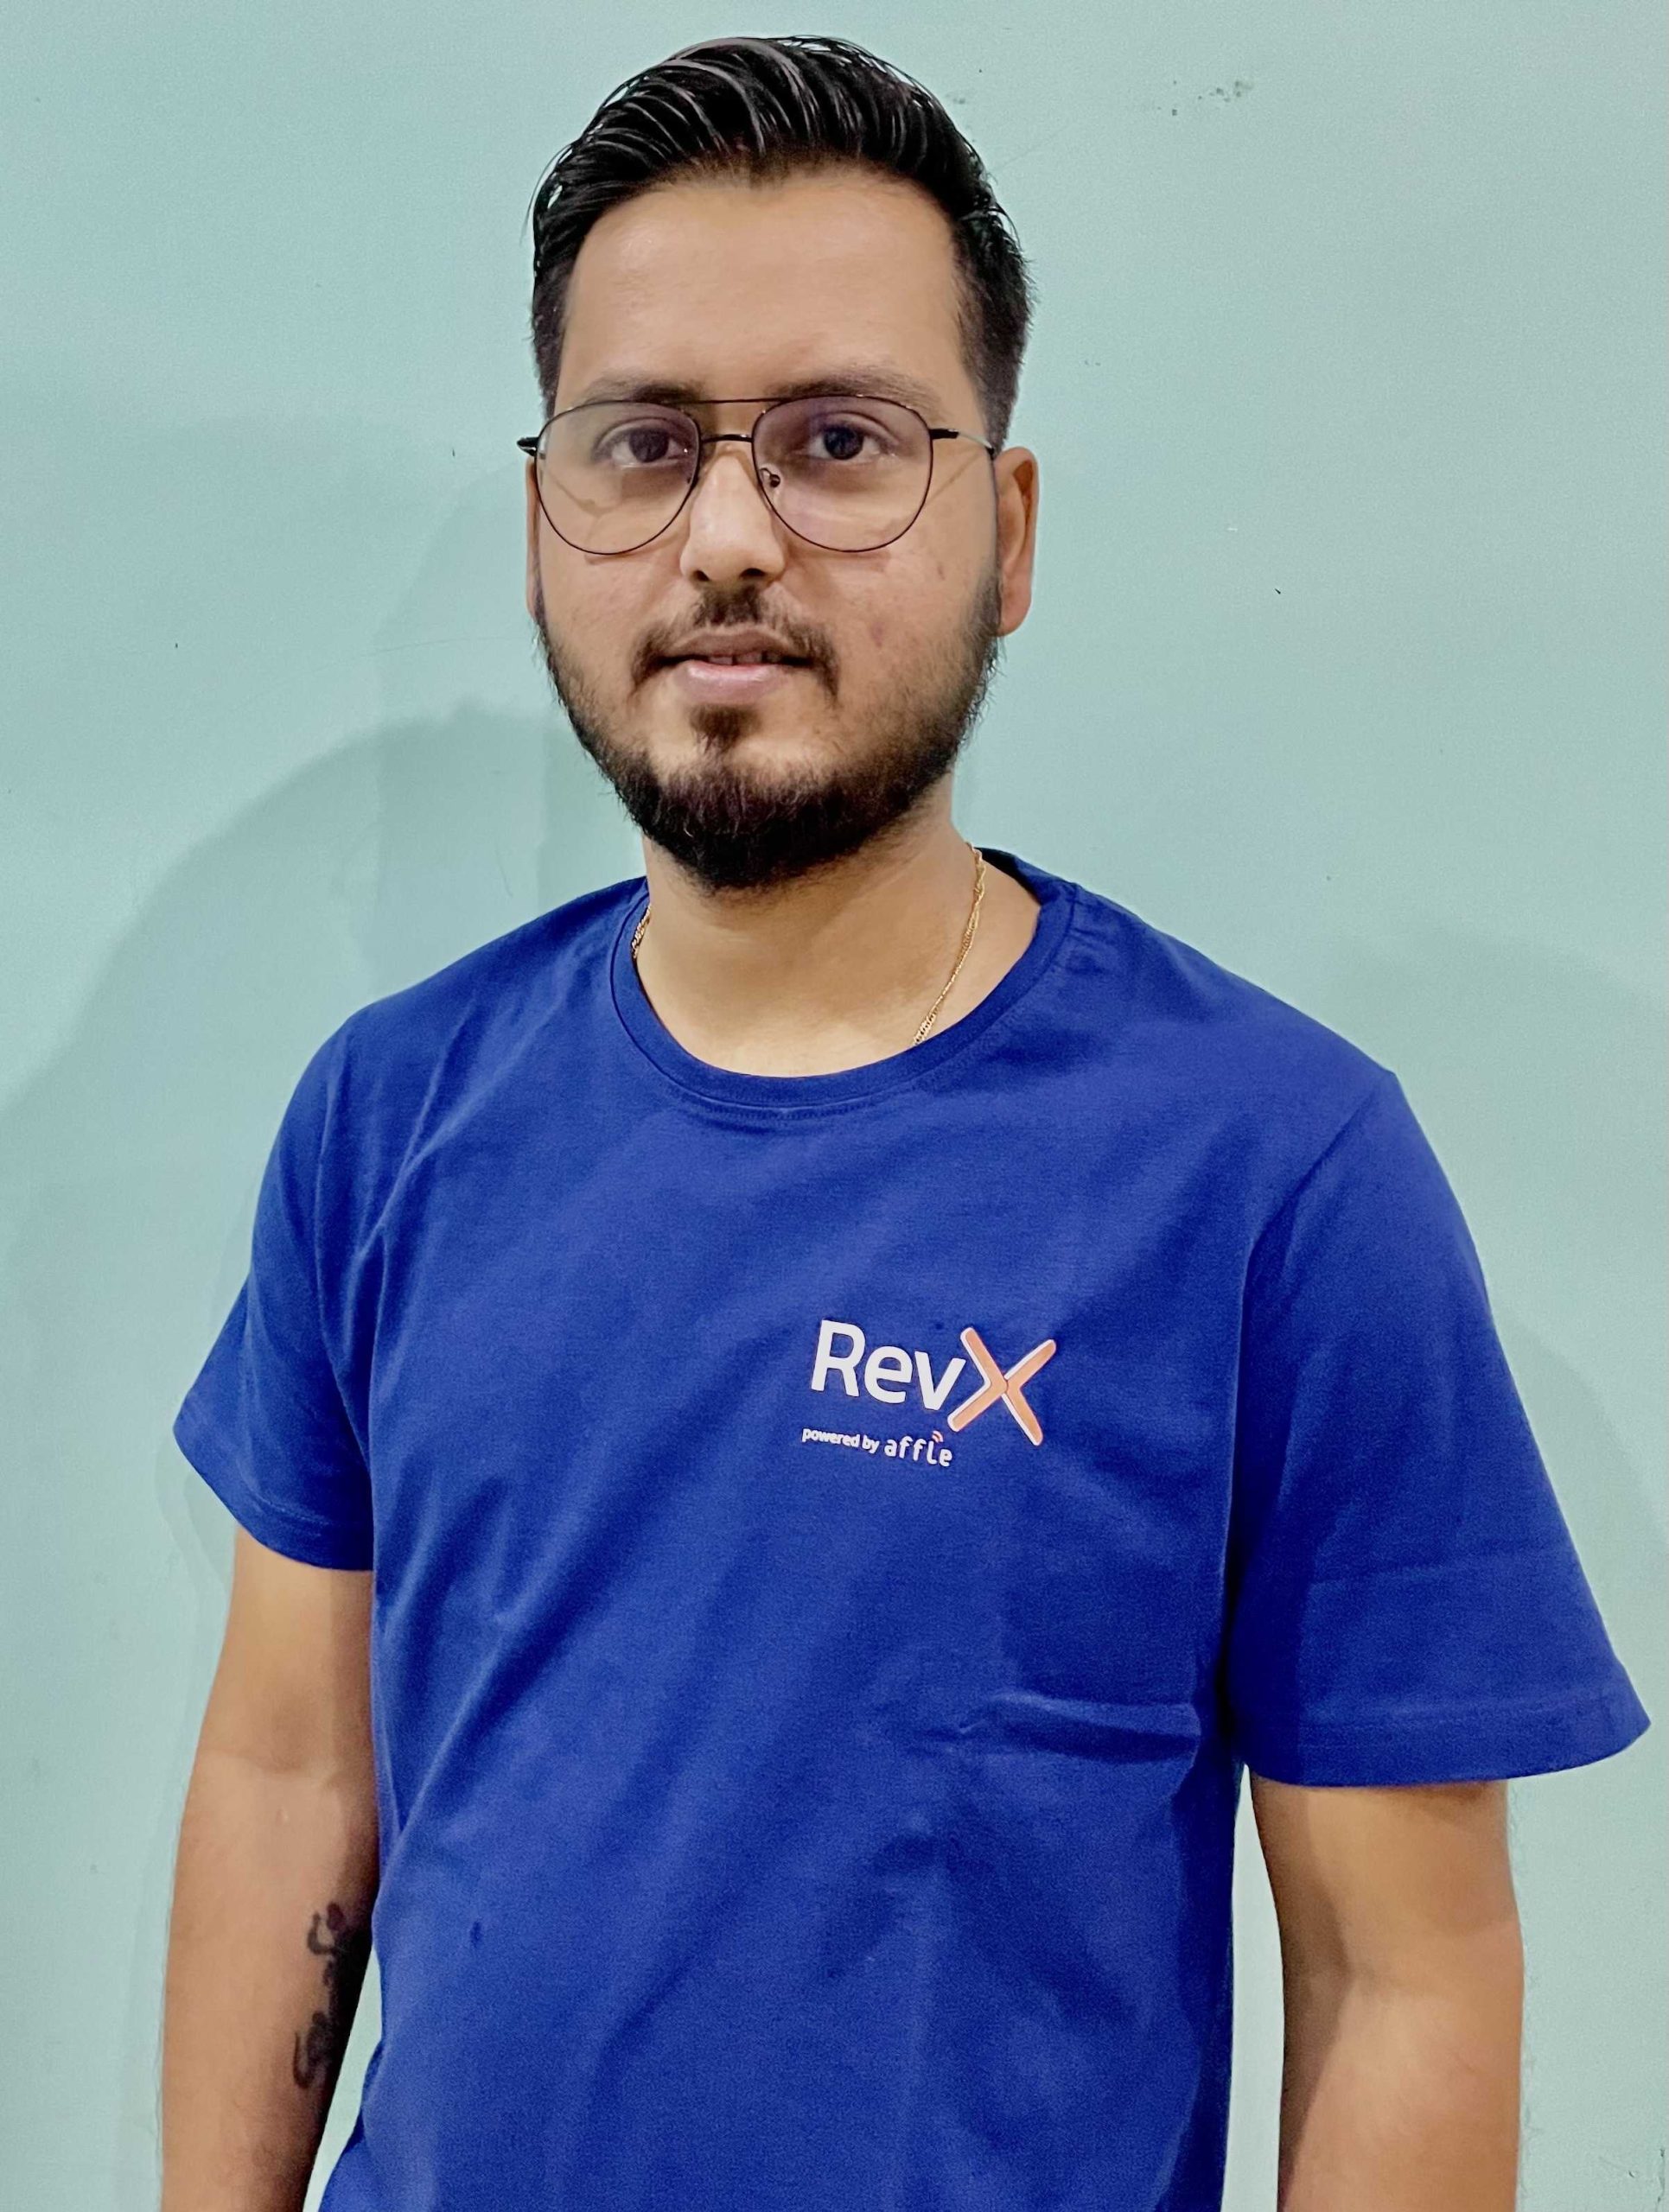 A picture of the product head at RevX, Partha Kataky